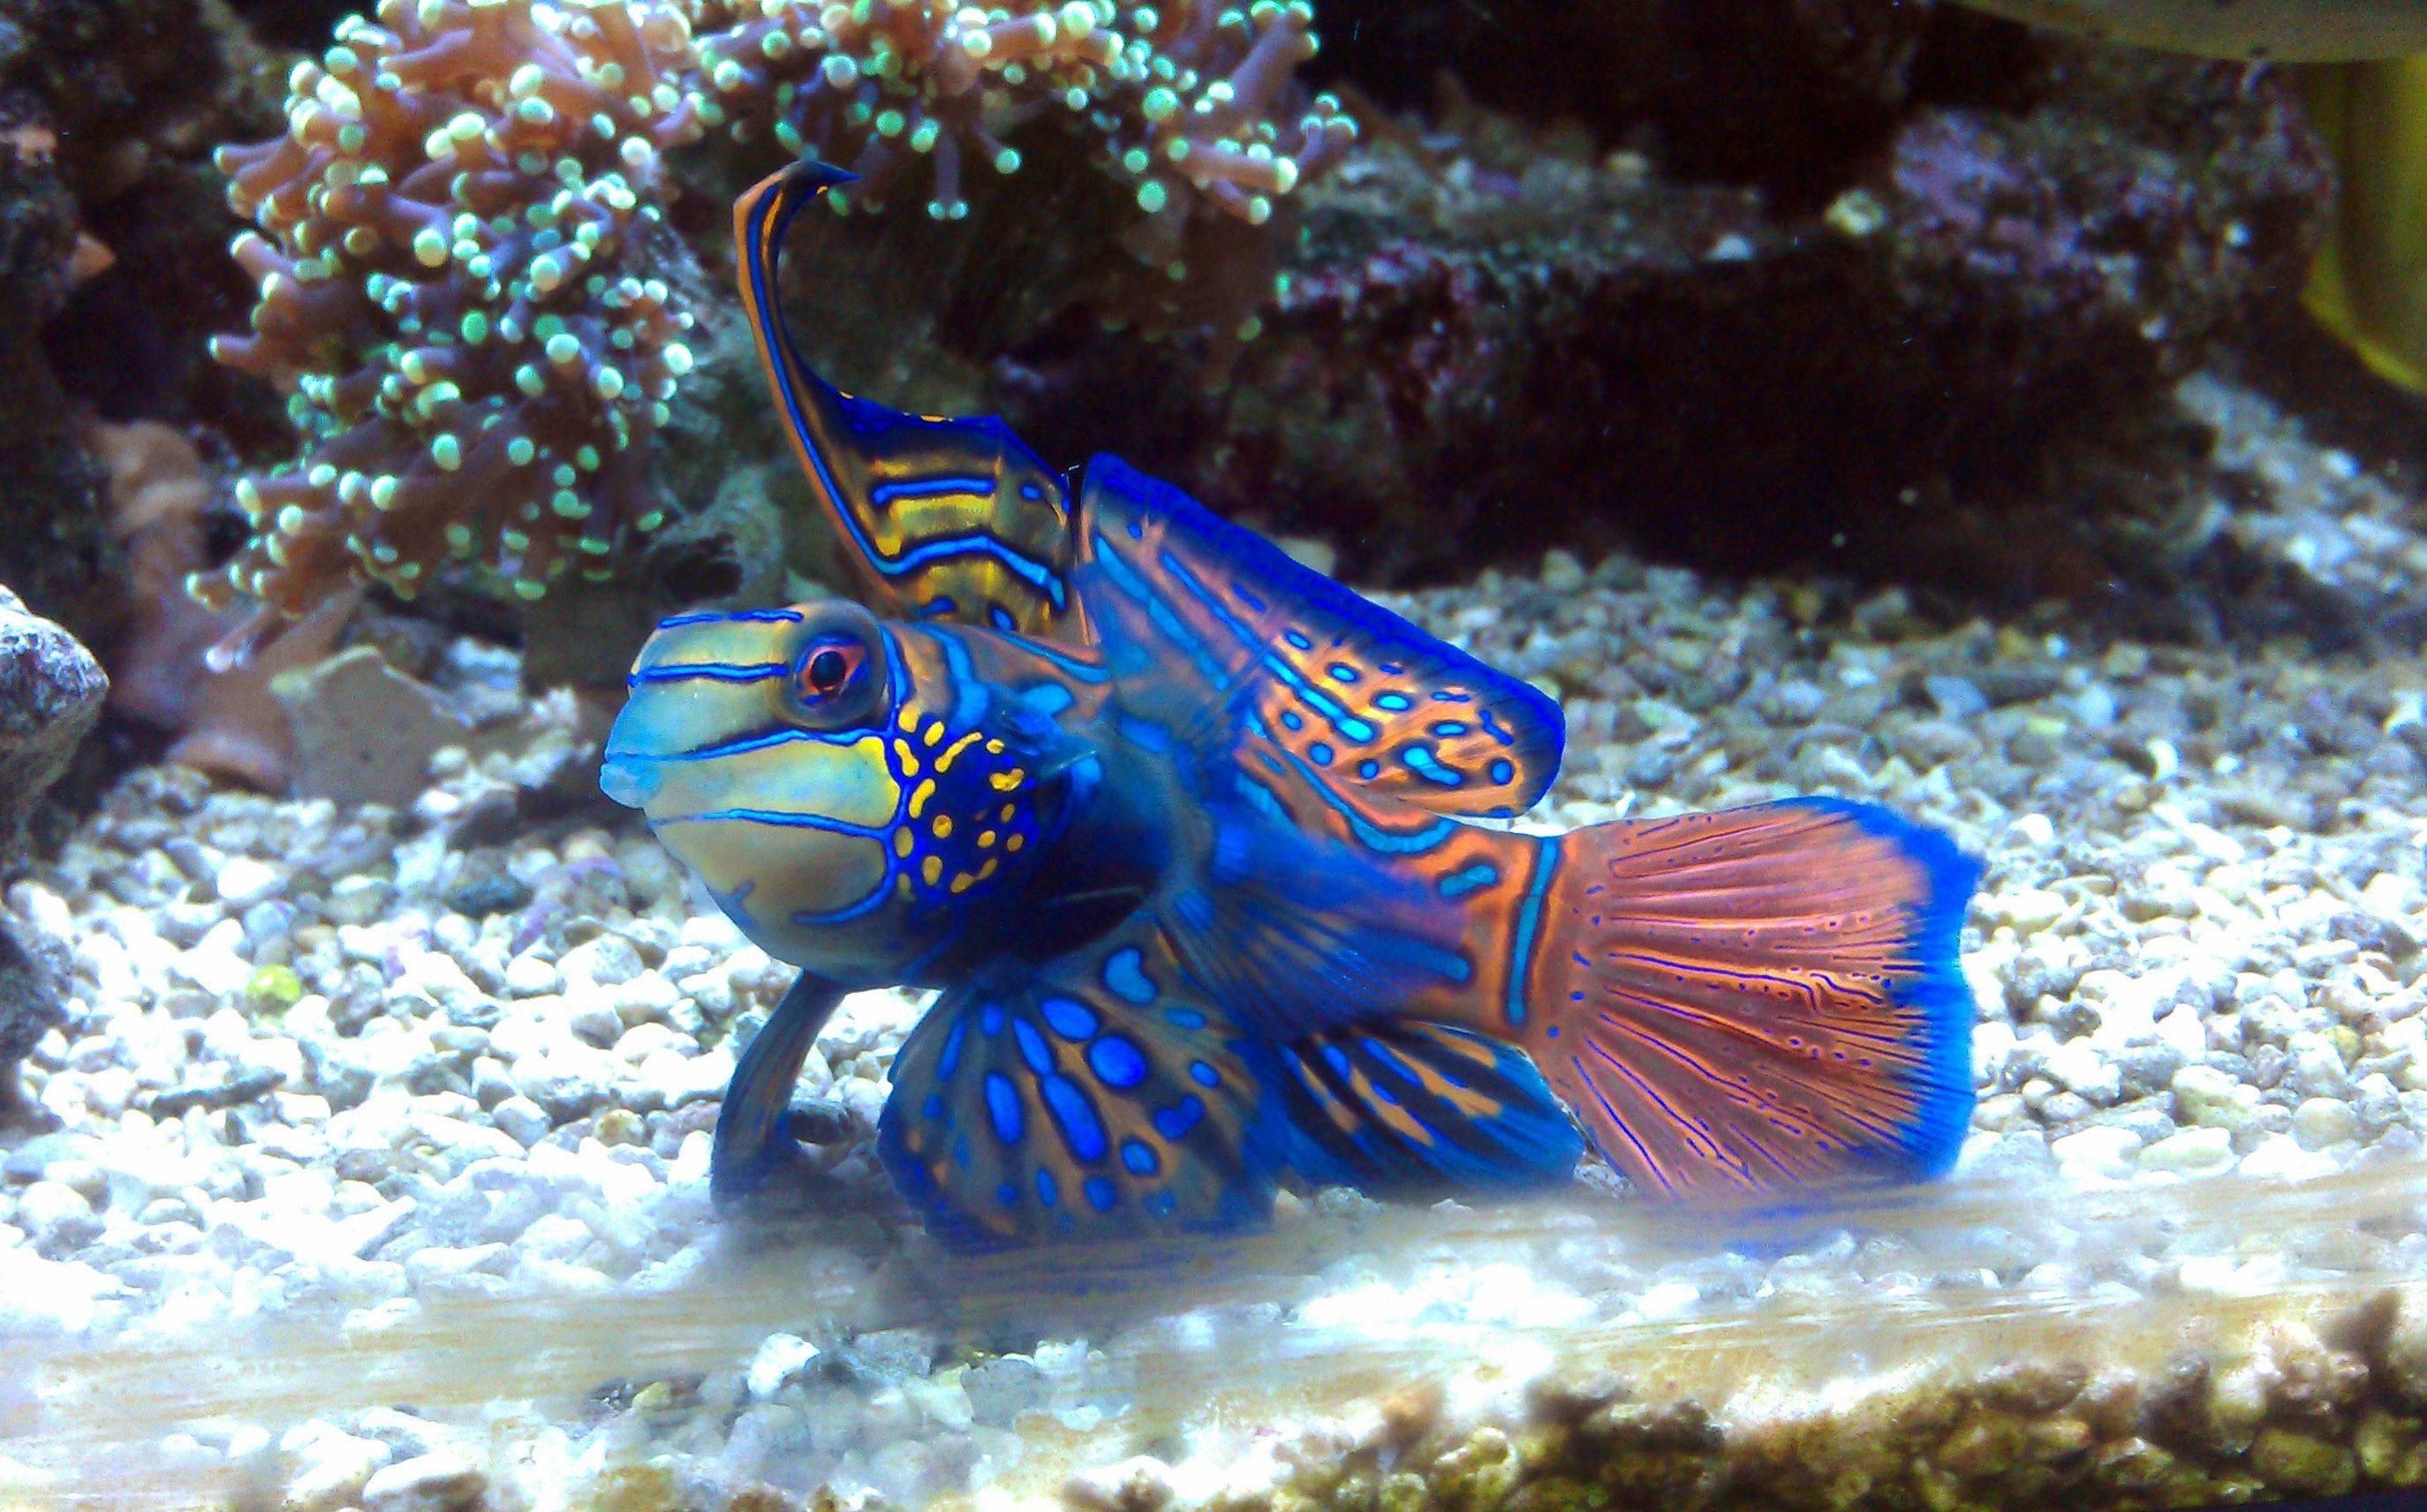 2748x1712 Saw this beatiful fish in a saltwater aquarium. Does anyone know what kind  of fish this is?